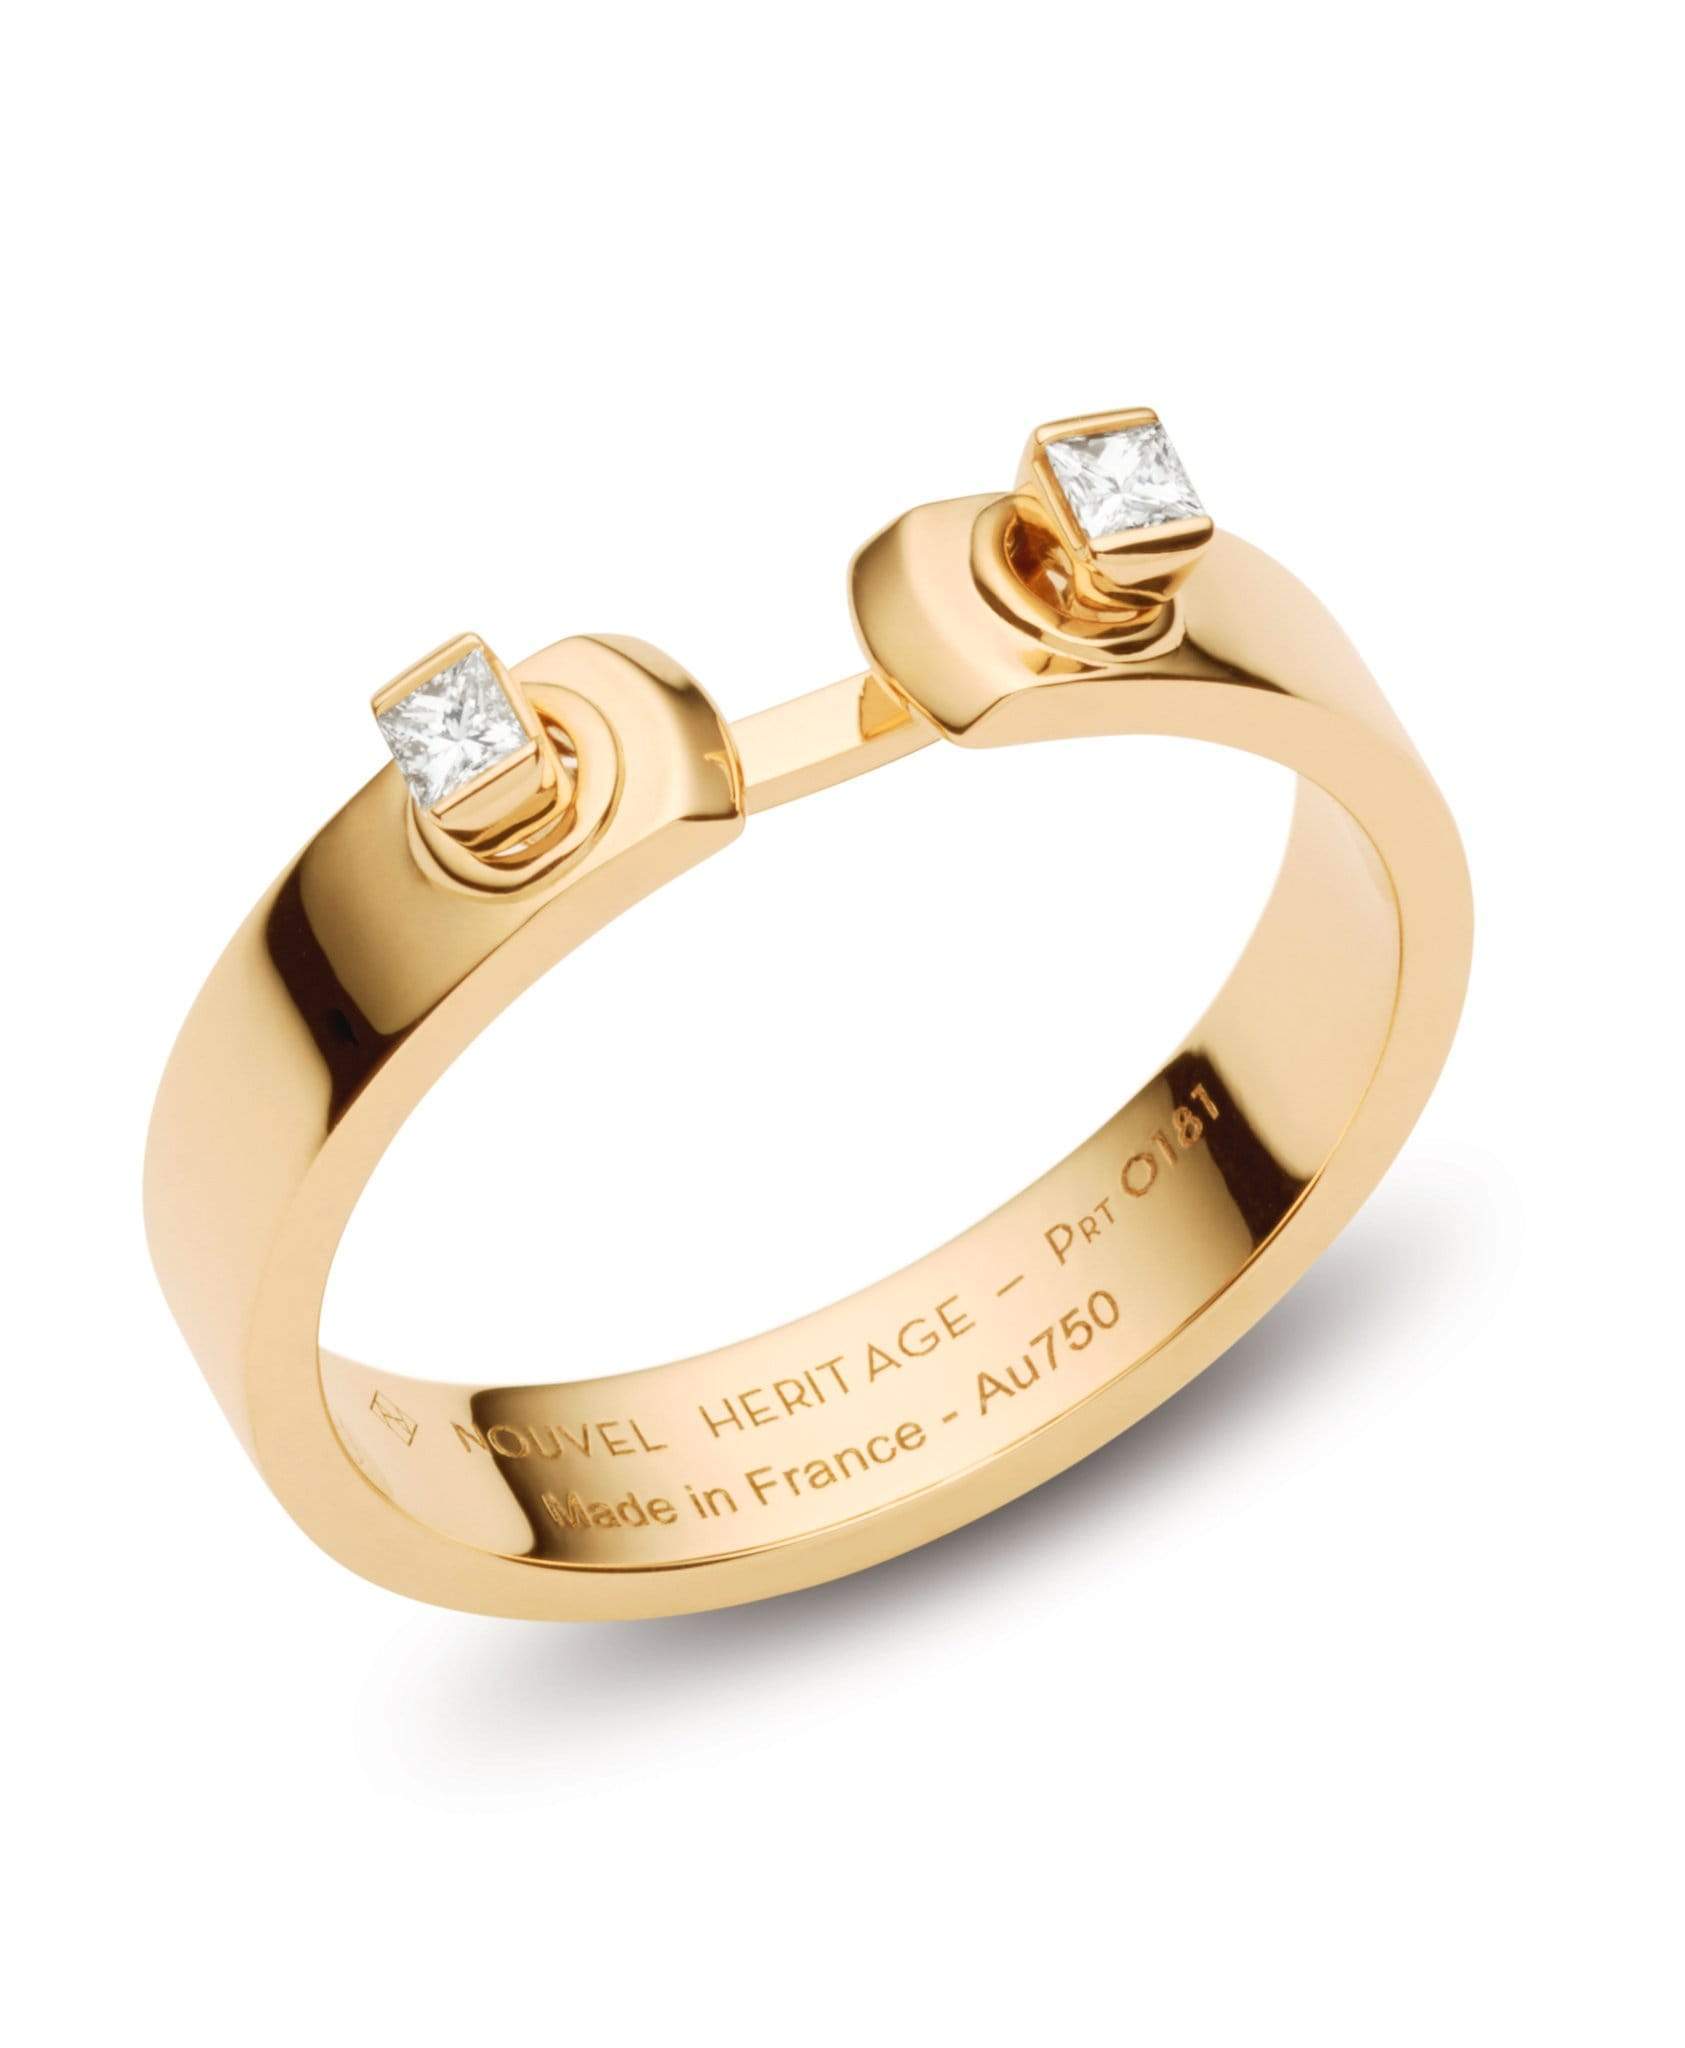 Dinner Date Mood Ring: Discover Luxury Fine Jewelry | Nouvel Heritage || Yellow Gold